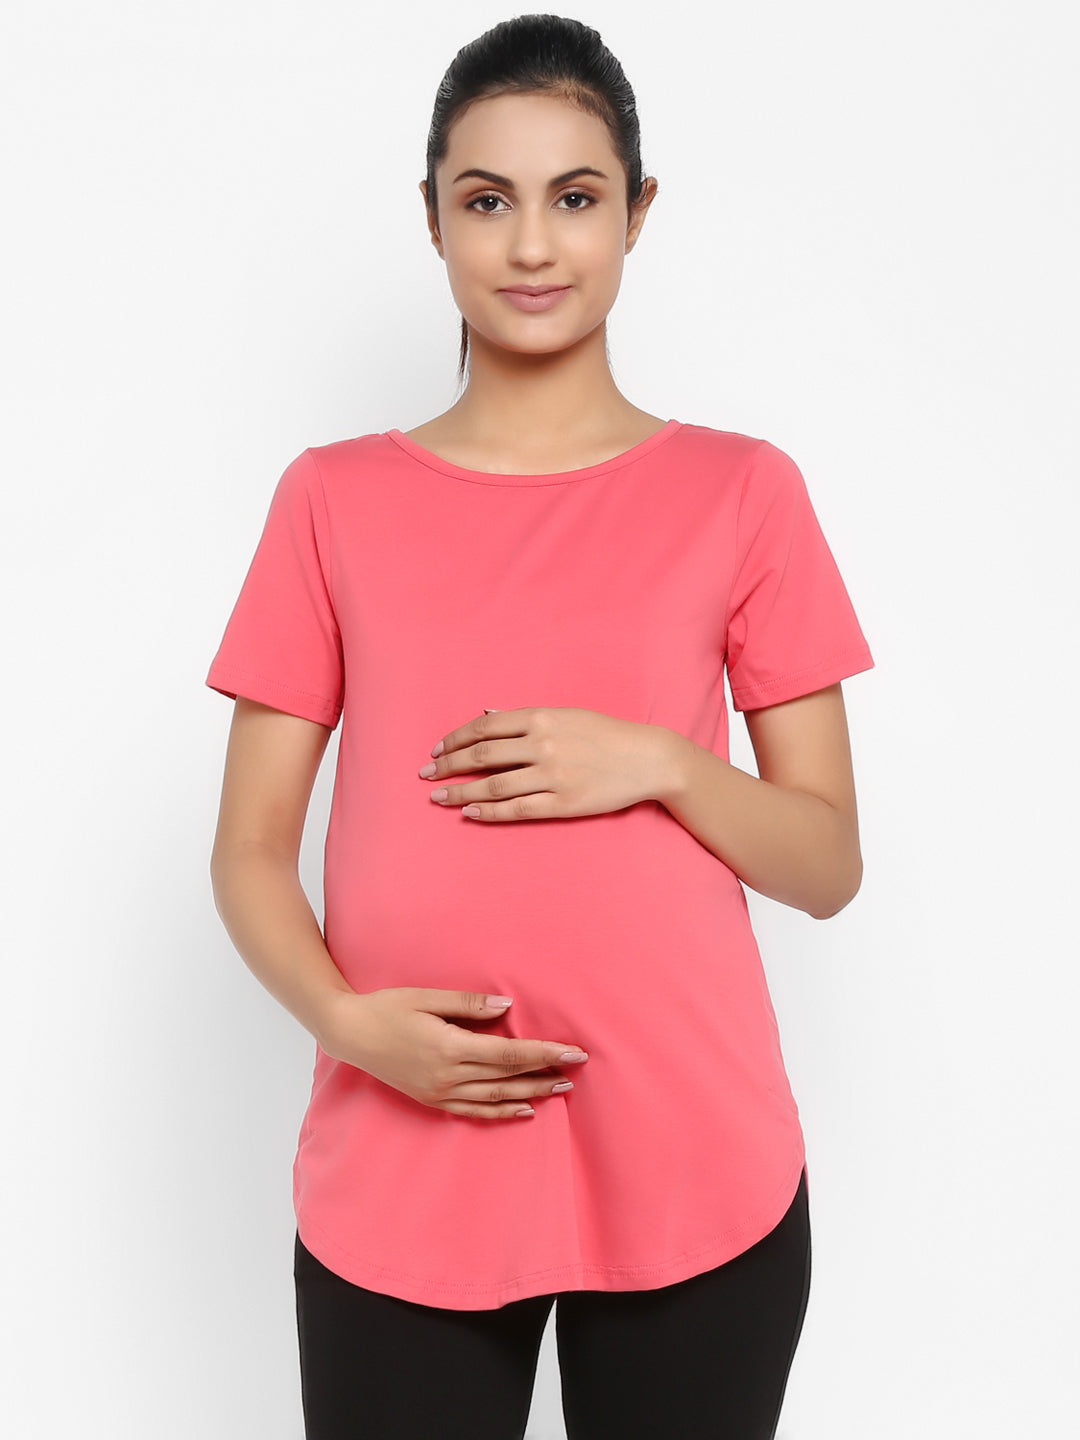 Quealent Womens Maternity Short Sleeve Crew Neck Cute Letter